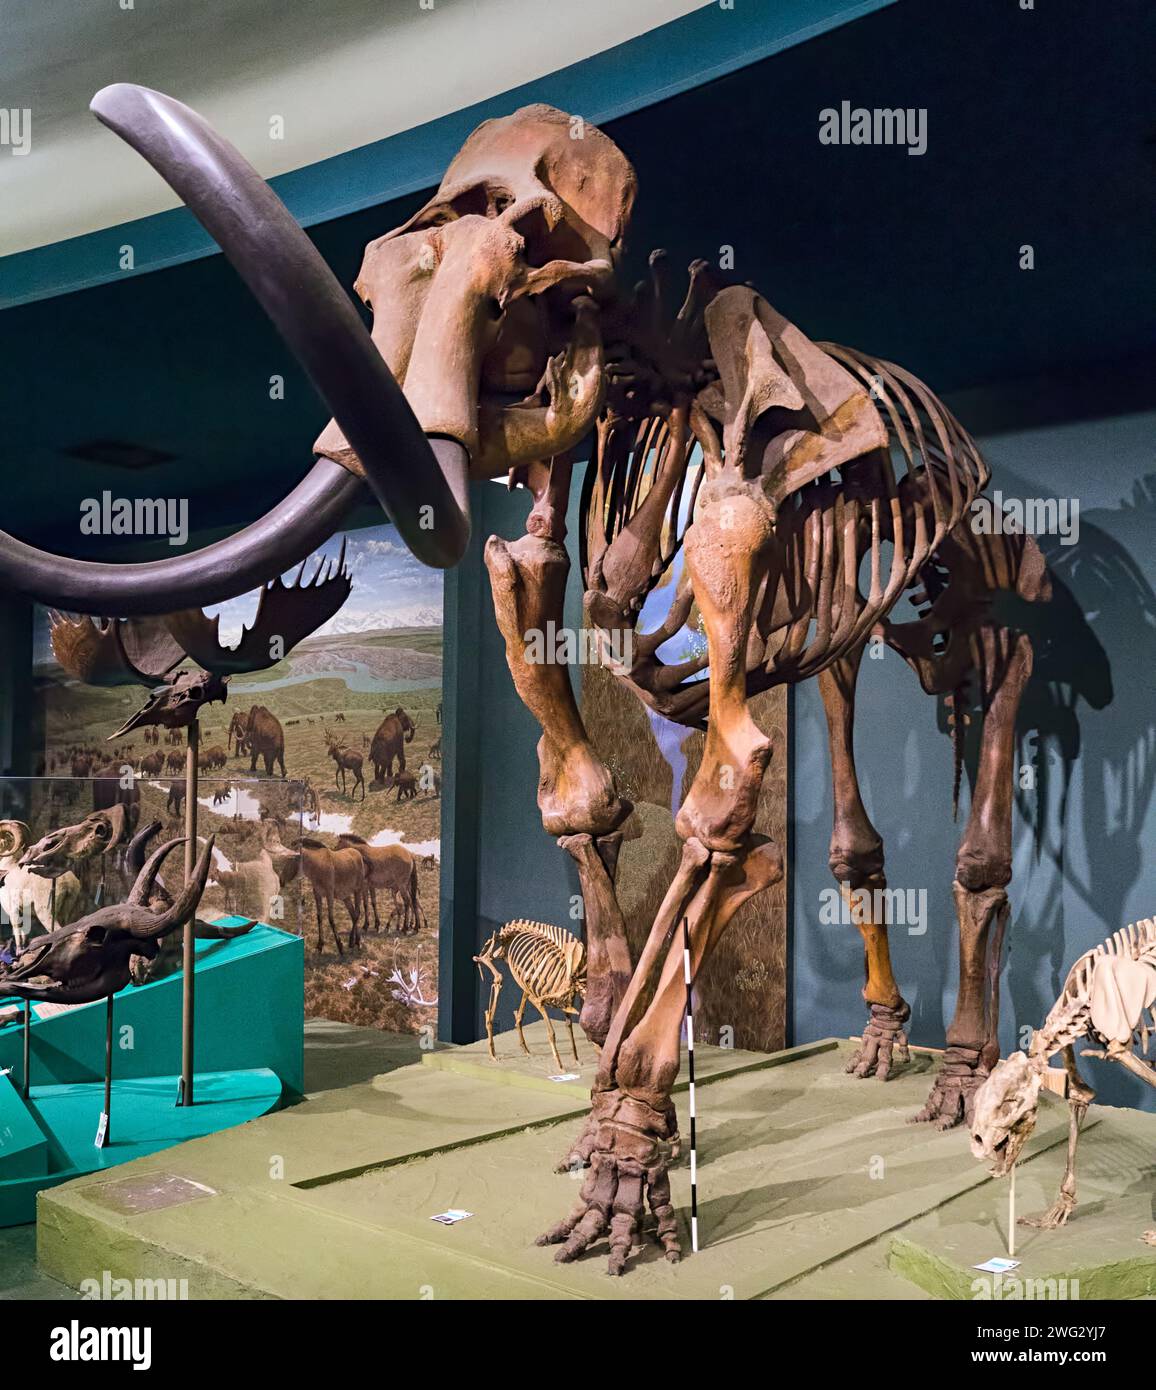 Mammoth skeleton,  Mammuthus primigenius, skeletal specimen on display in the Ice Age Mammals exhibition of the Paleobiology Hall at the Smithsonian Institution National Museum of Natural History in Washington, D.C. The skeletal elements were collected in 1952 in Alaska. Stock Photo